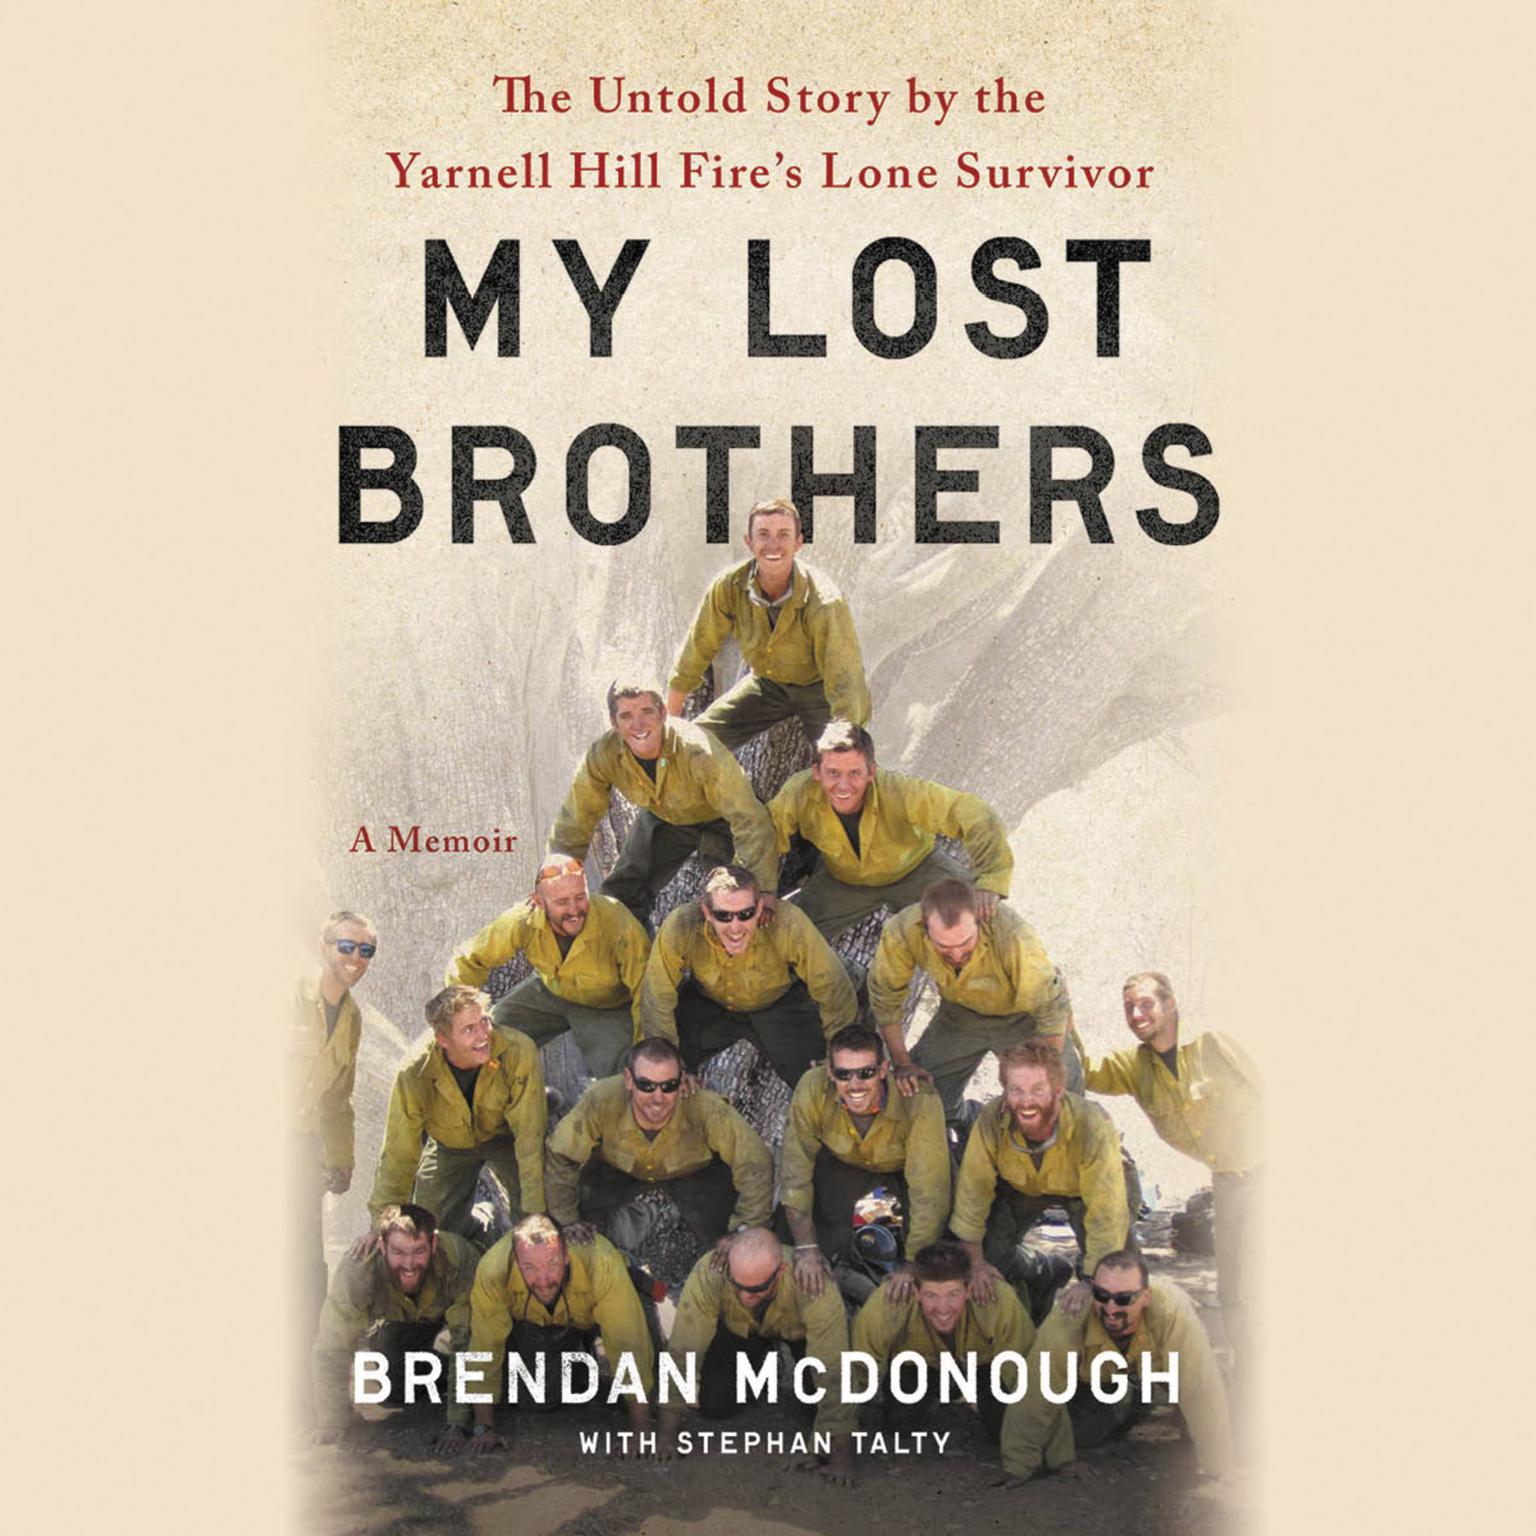 Granite Mountain: The Firsthand Account of a Tragic Wildfire, Its Lone Survivor, and the Firefighters Who Made the Ultimate Sacrifice Audiobook, by Brendan McDonough